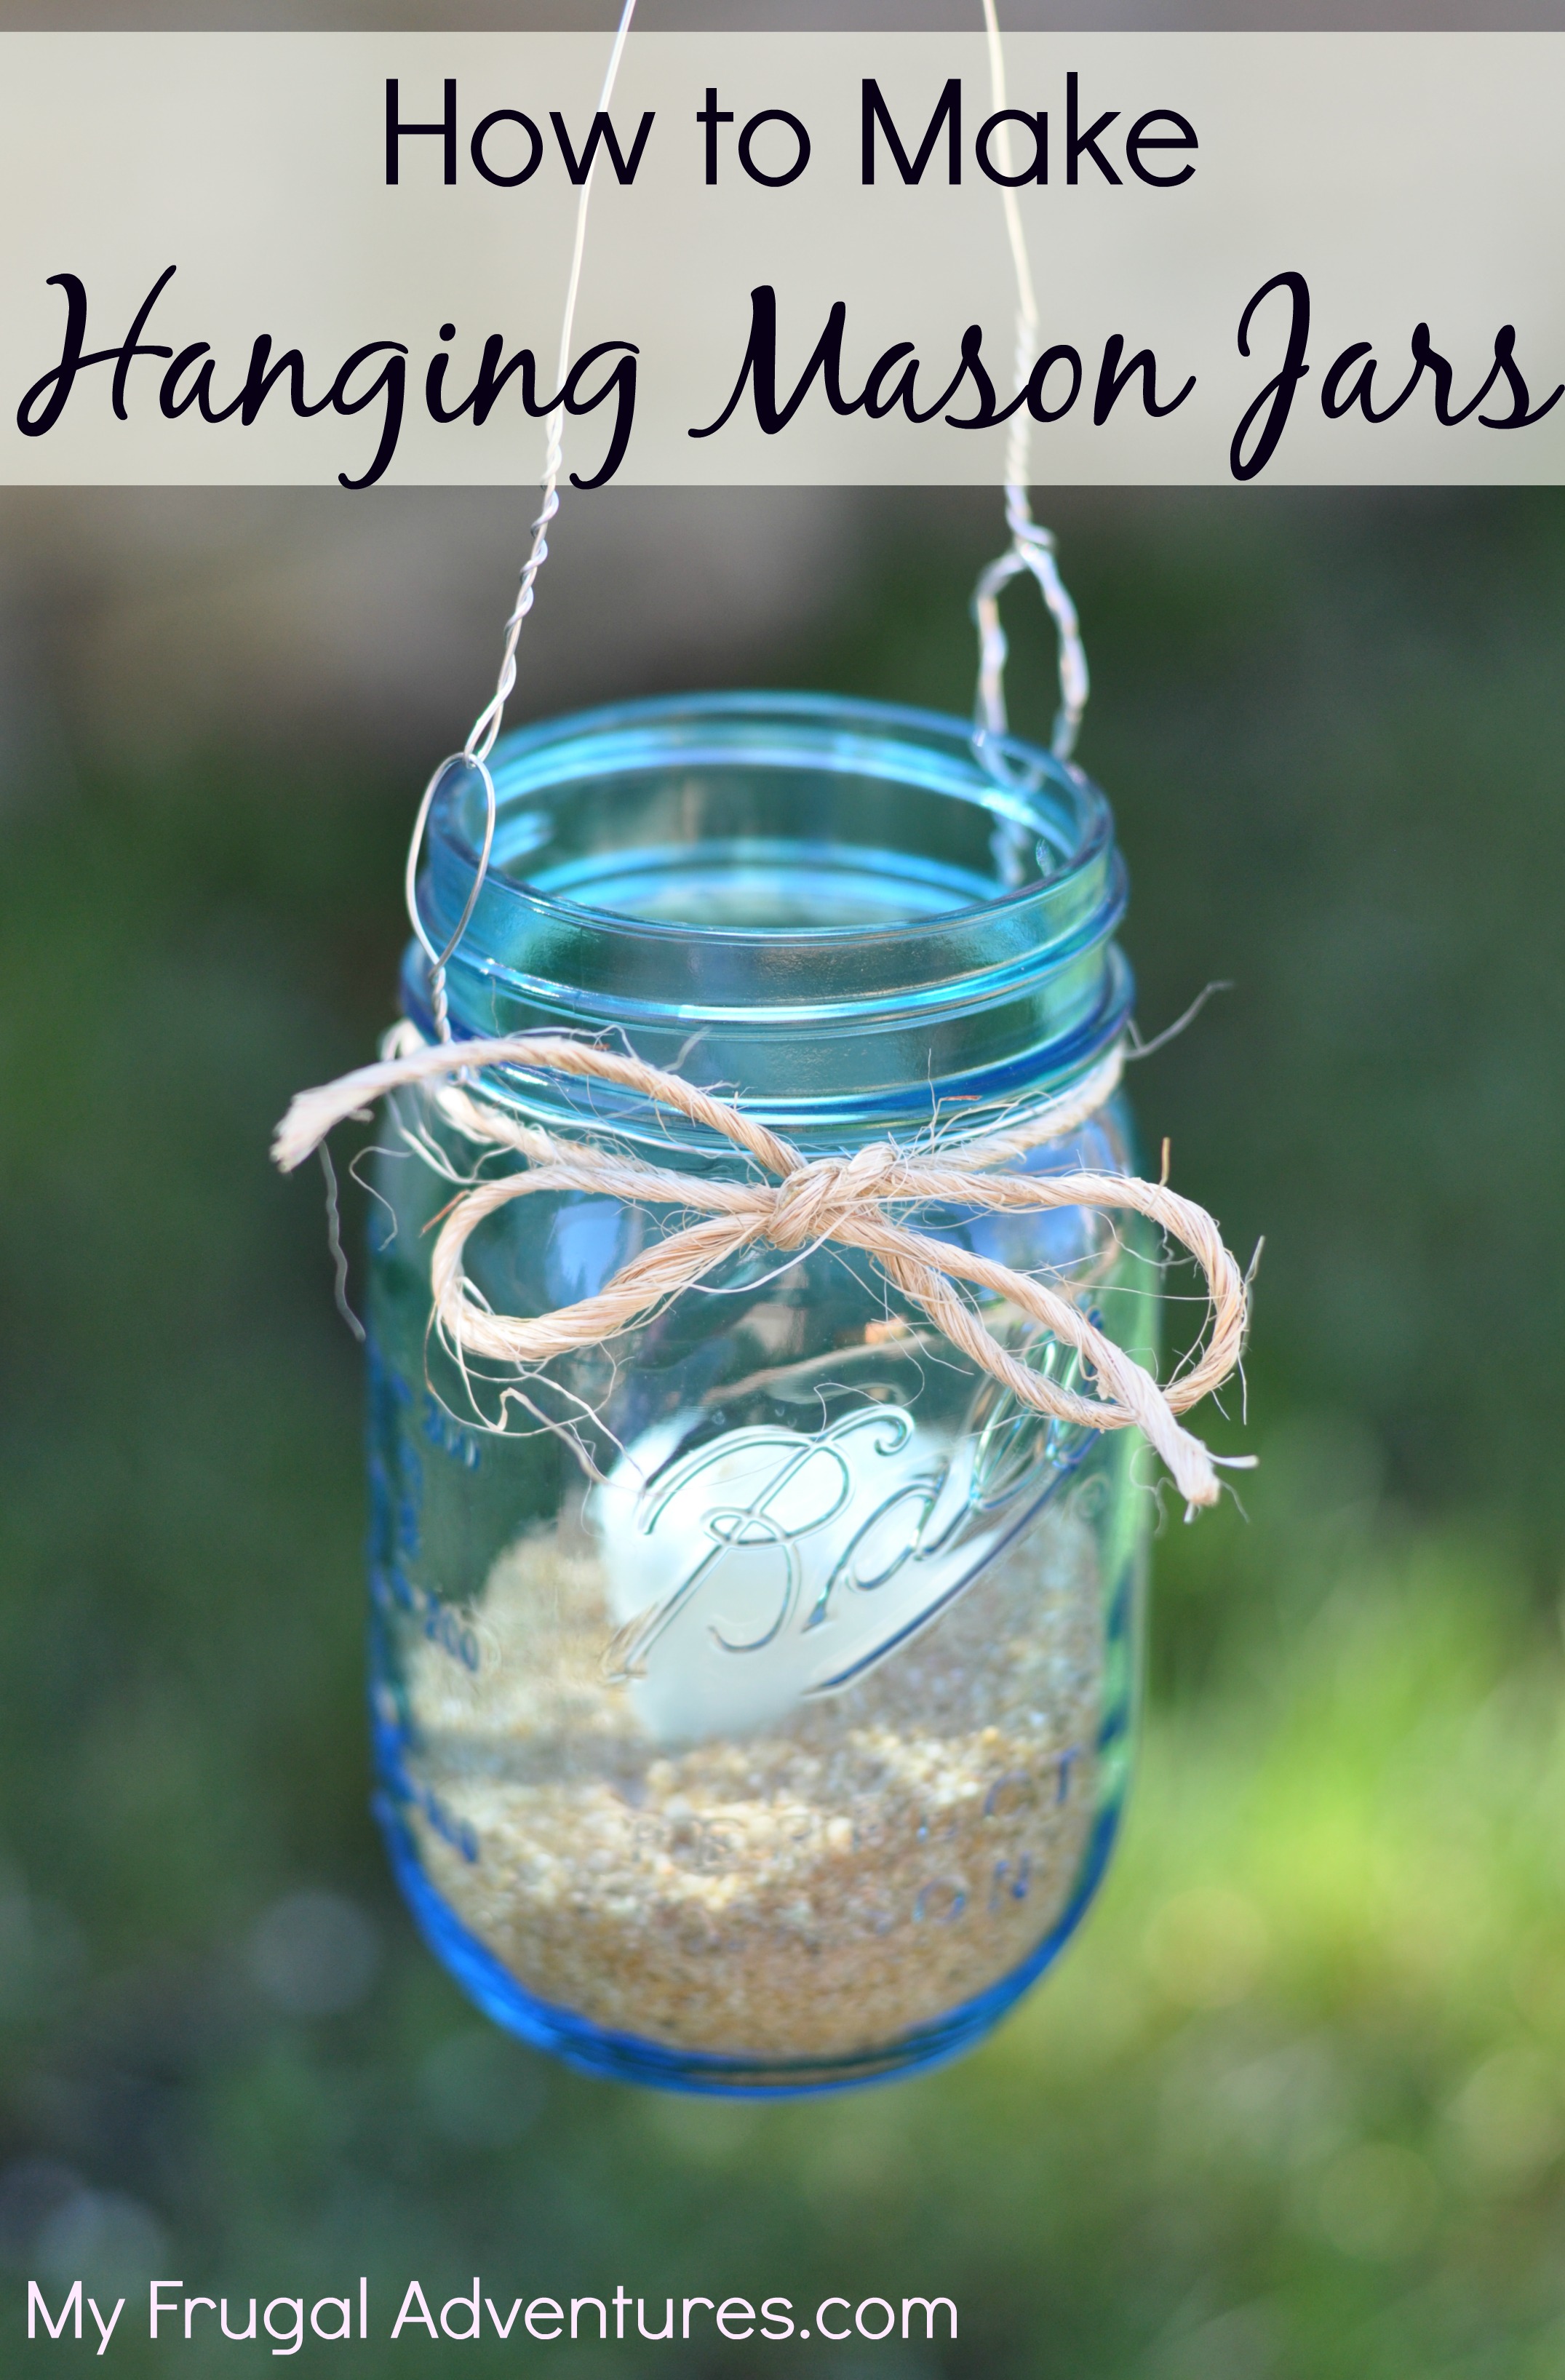 https://myfrugaladventures.com/wp-content/uploads/2014/03/How-to-Make-Hanging-Mason-Jars-so-easy-and-so-inexpensive.jpg